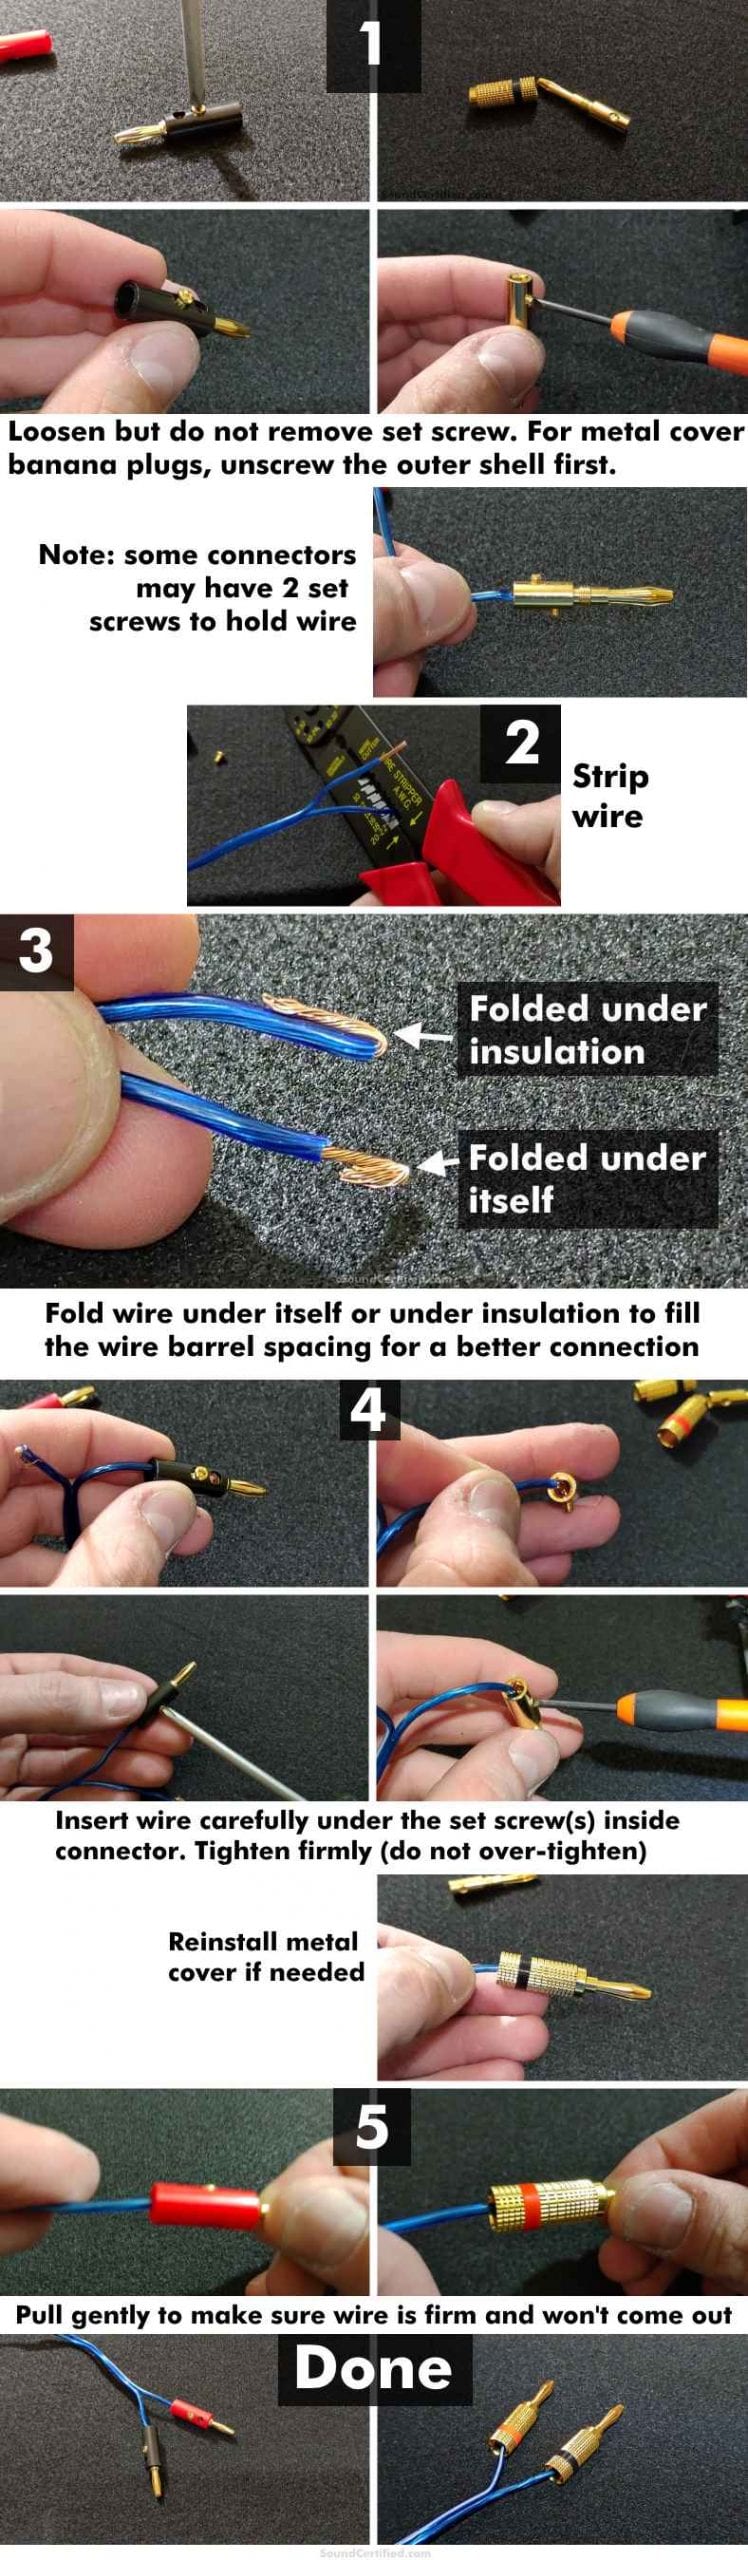 Image with instructions for how to connect speaker wire to banana plugs with set screws